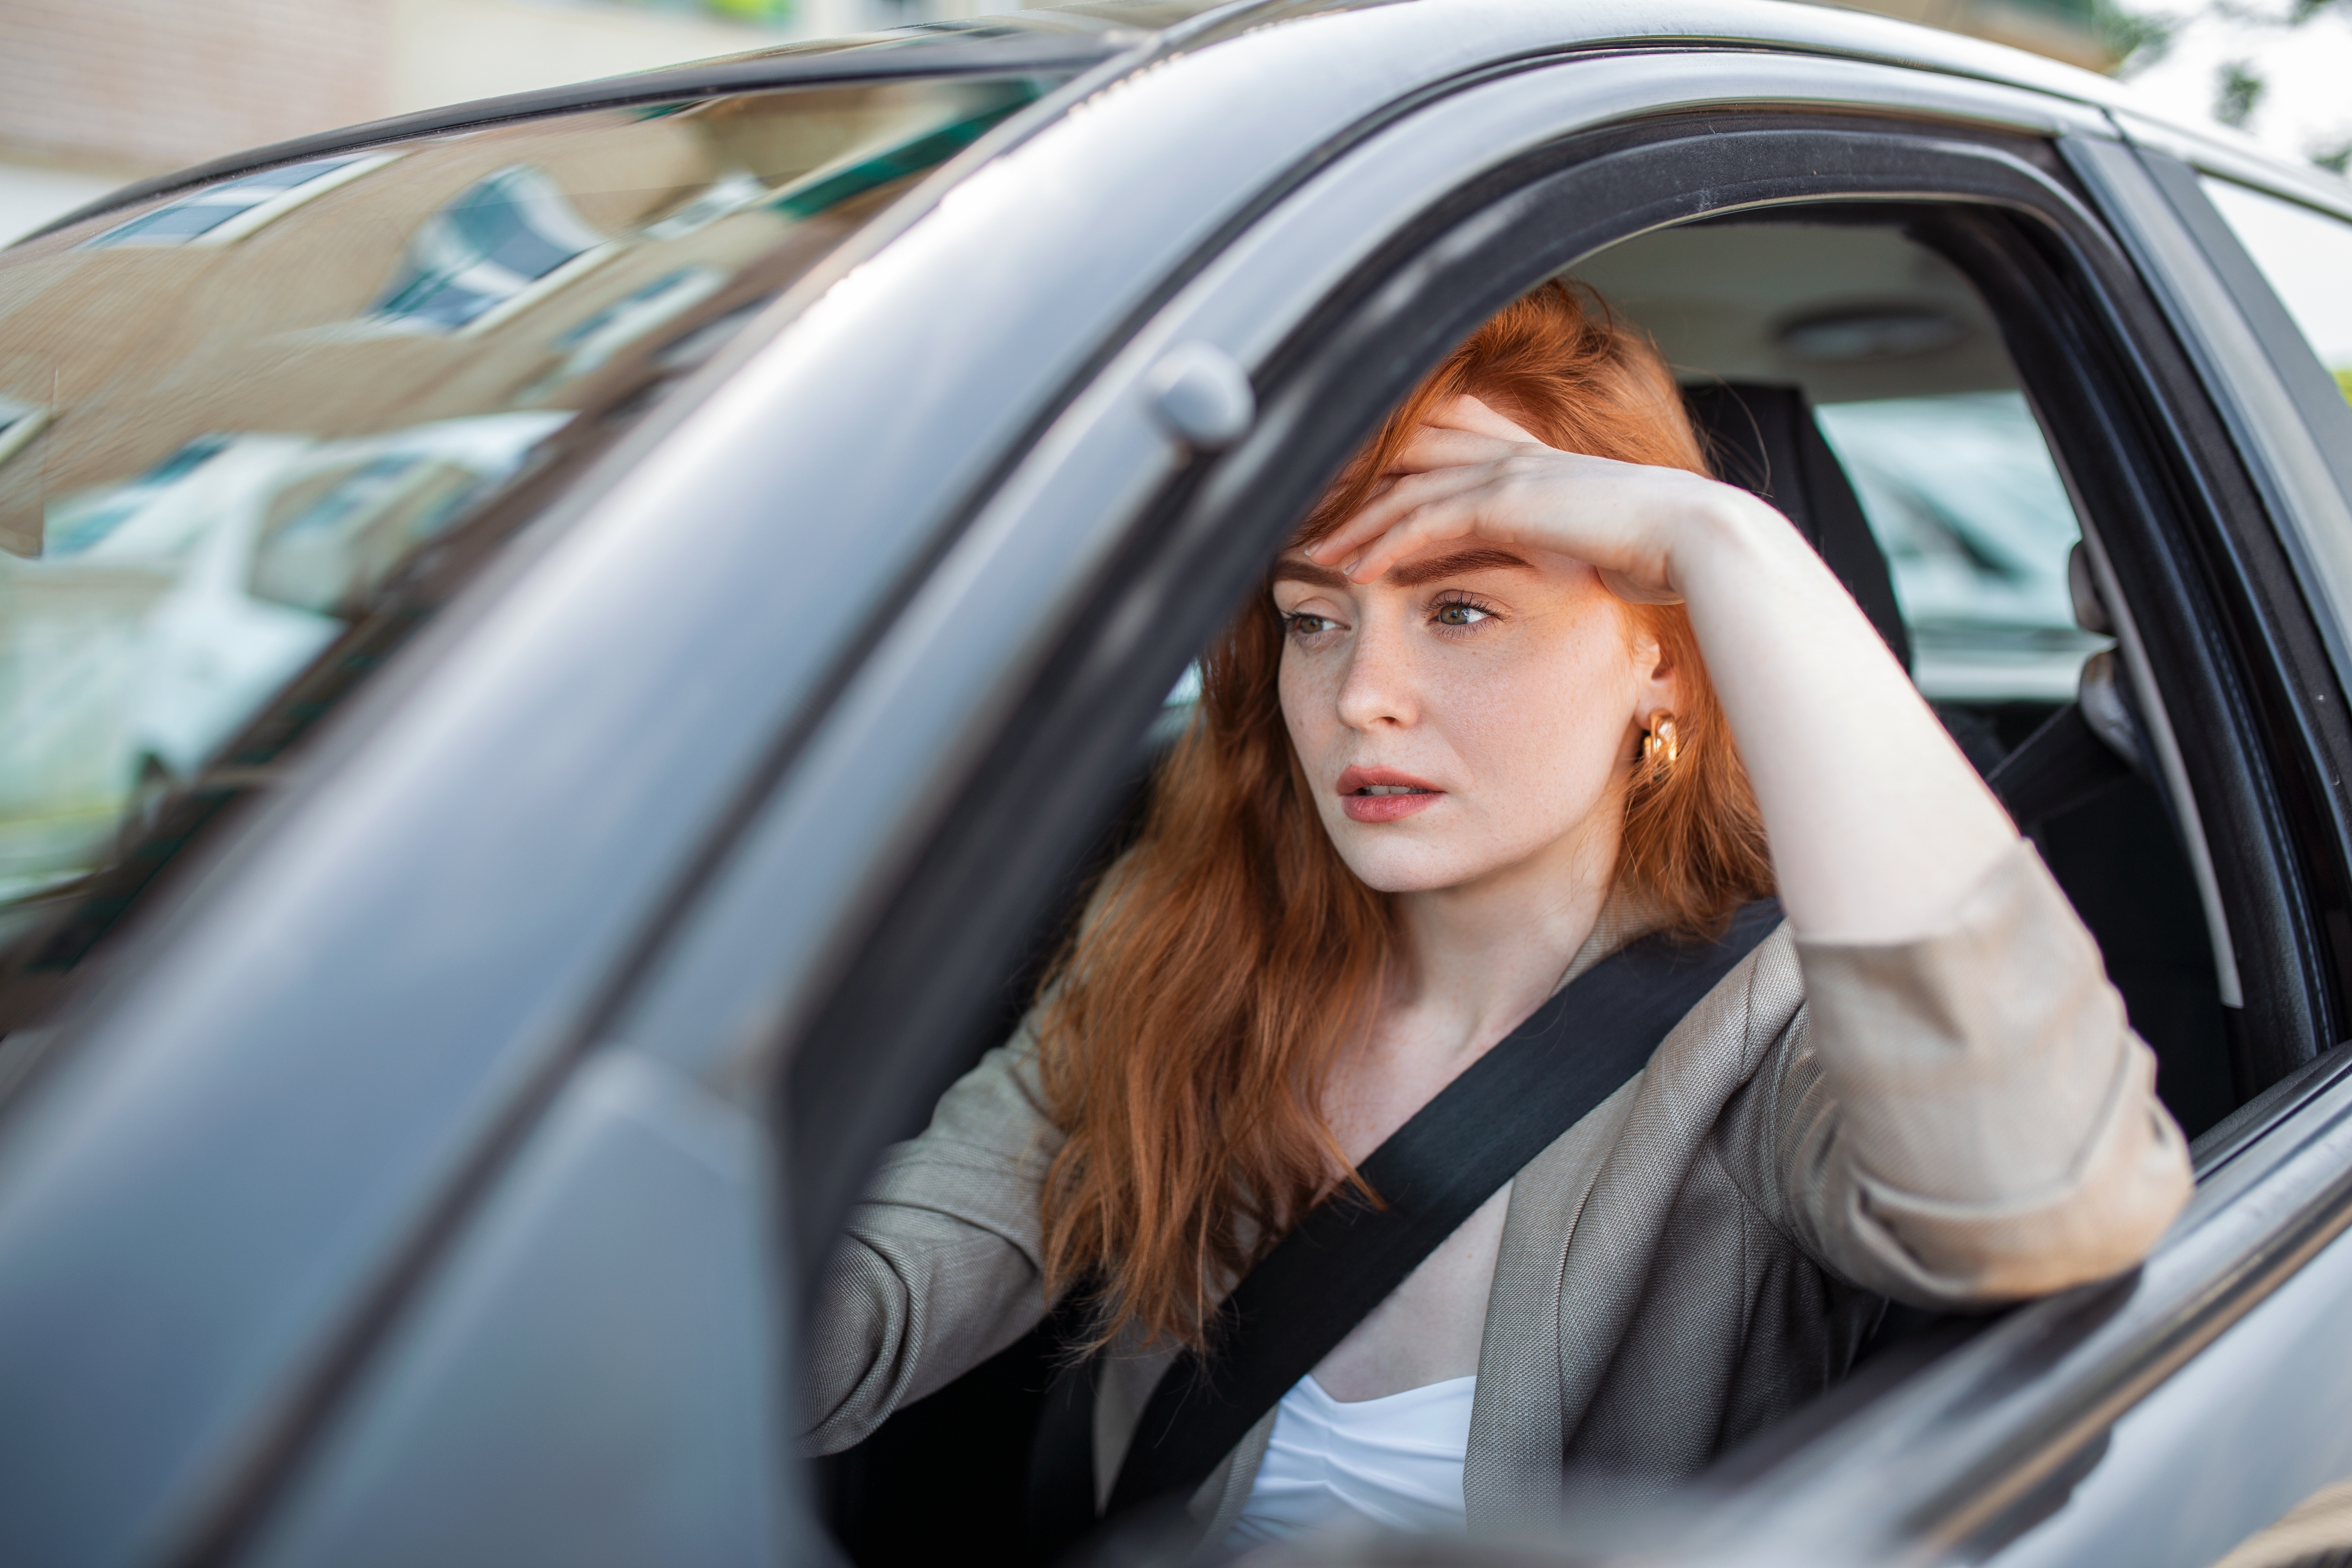 A woman thinking about something while sitting behind the wheel | Source: Shutterstock